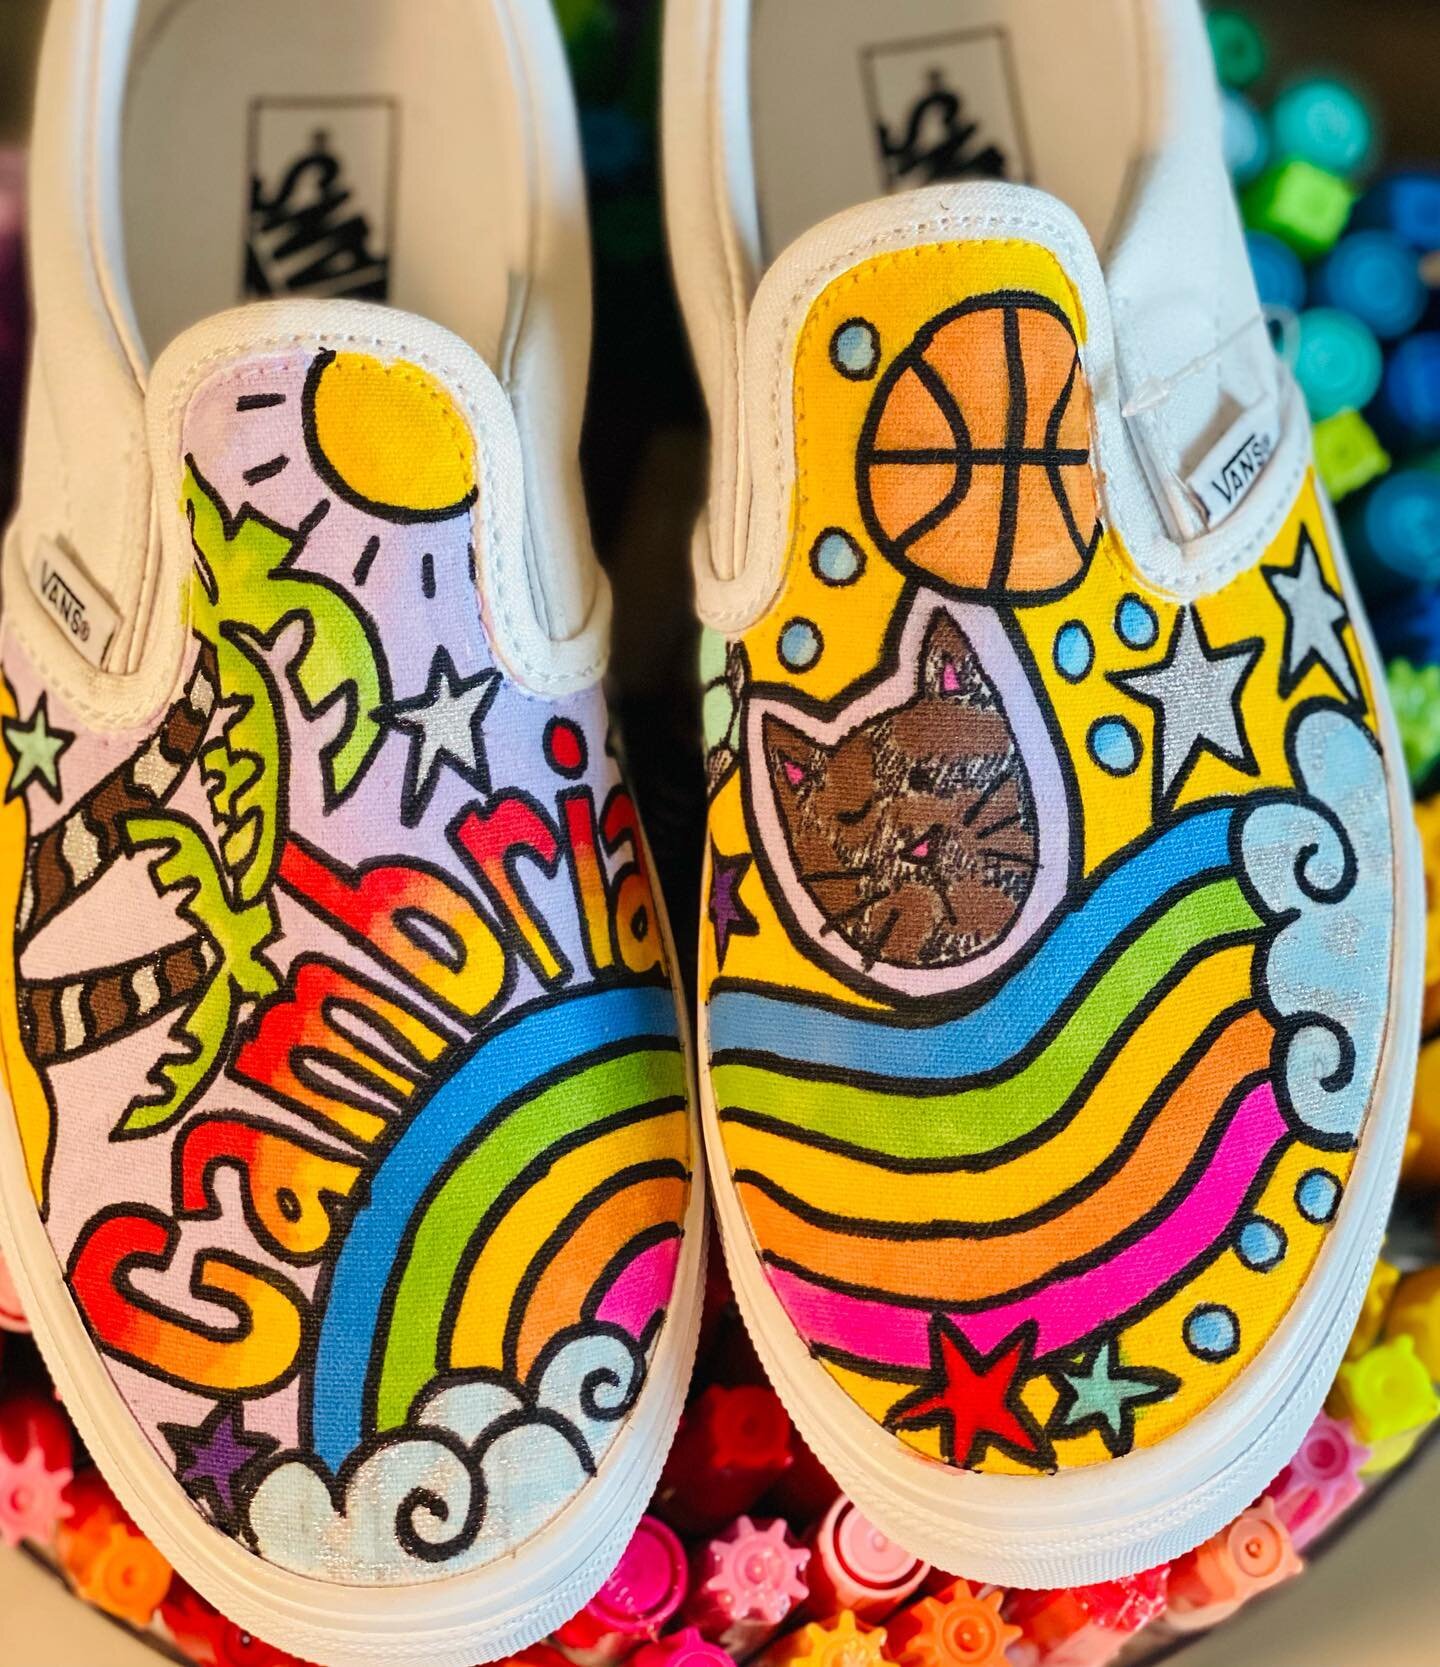 Oooooook C&hellip;..these could be a new fav!!!! 😍😍 love these choices sister girl! Hope you love them! 🌈😘💥 #customshoes #custom #jordan #shoes #vanstyle #sneakers #customsneakers #customkicks #art #af #sneakerhead #handmade #fashion #s #handmad